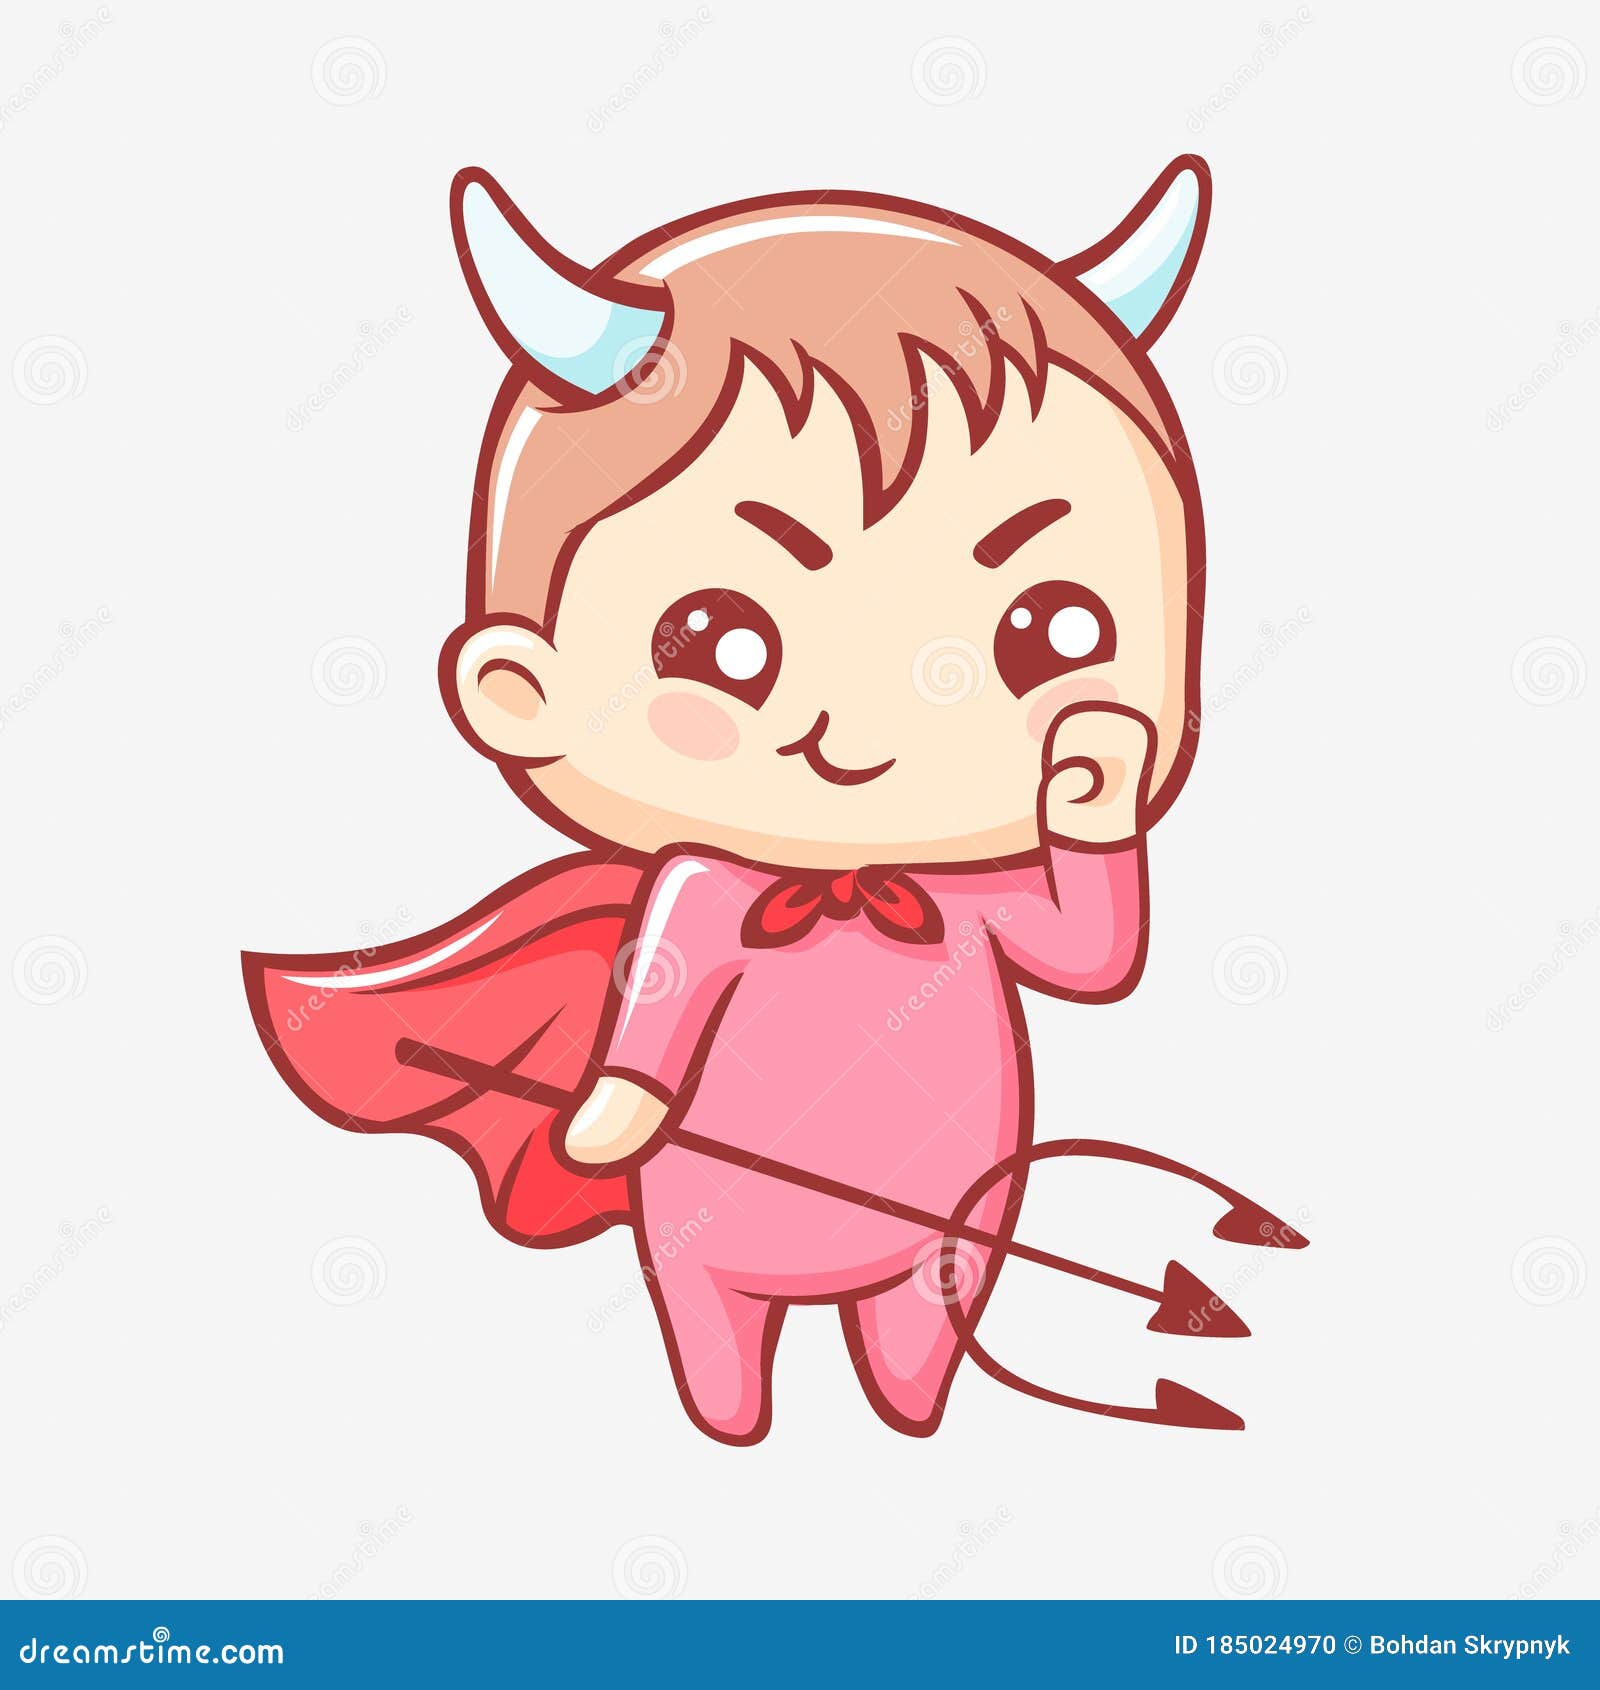 Little Demon Cartoon. Kawaii Smiling Cute Demon with Horns in a Red Cloak  with a Trident. Stock Vector - Illustration of cute, horn: 185024970